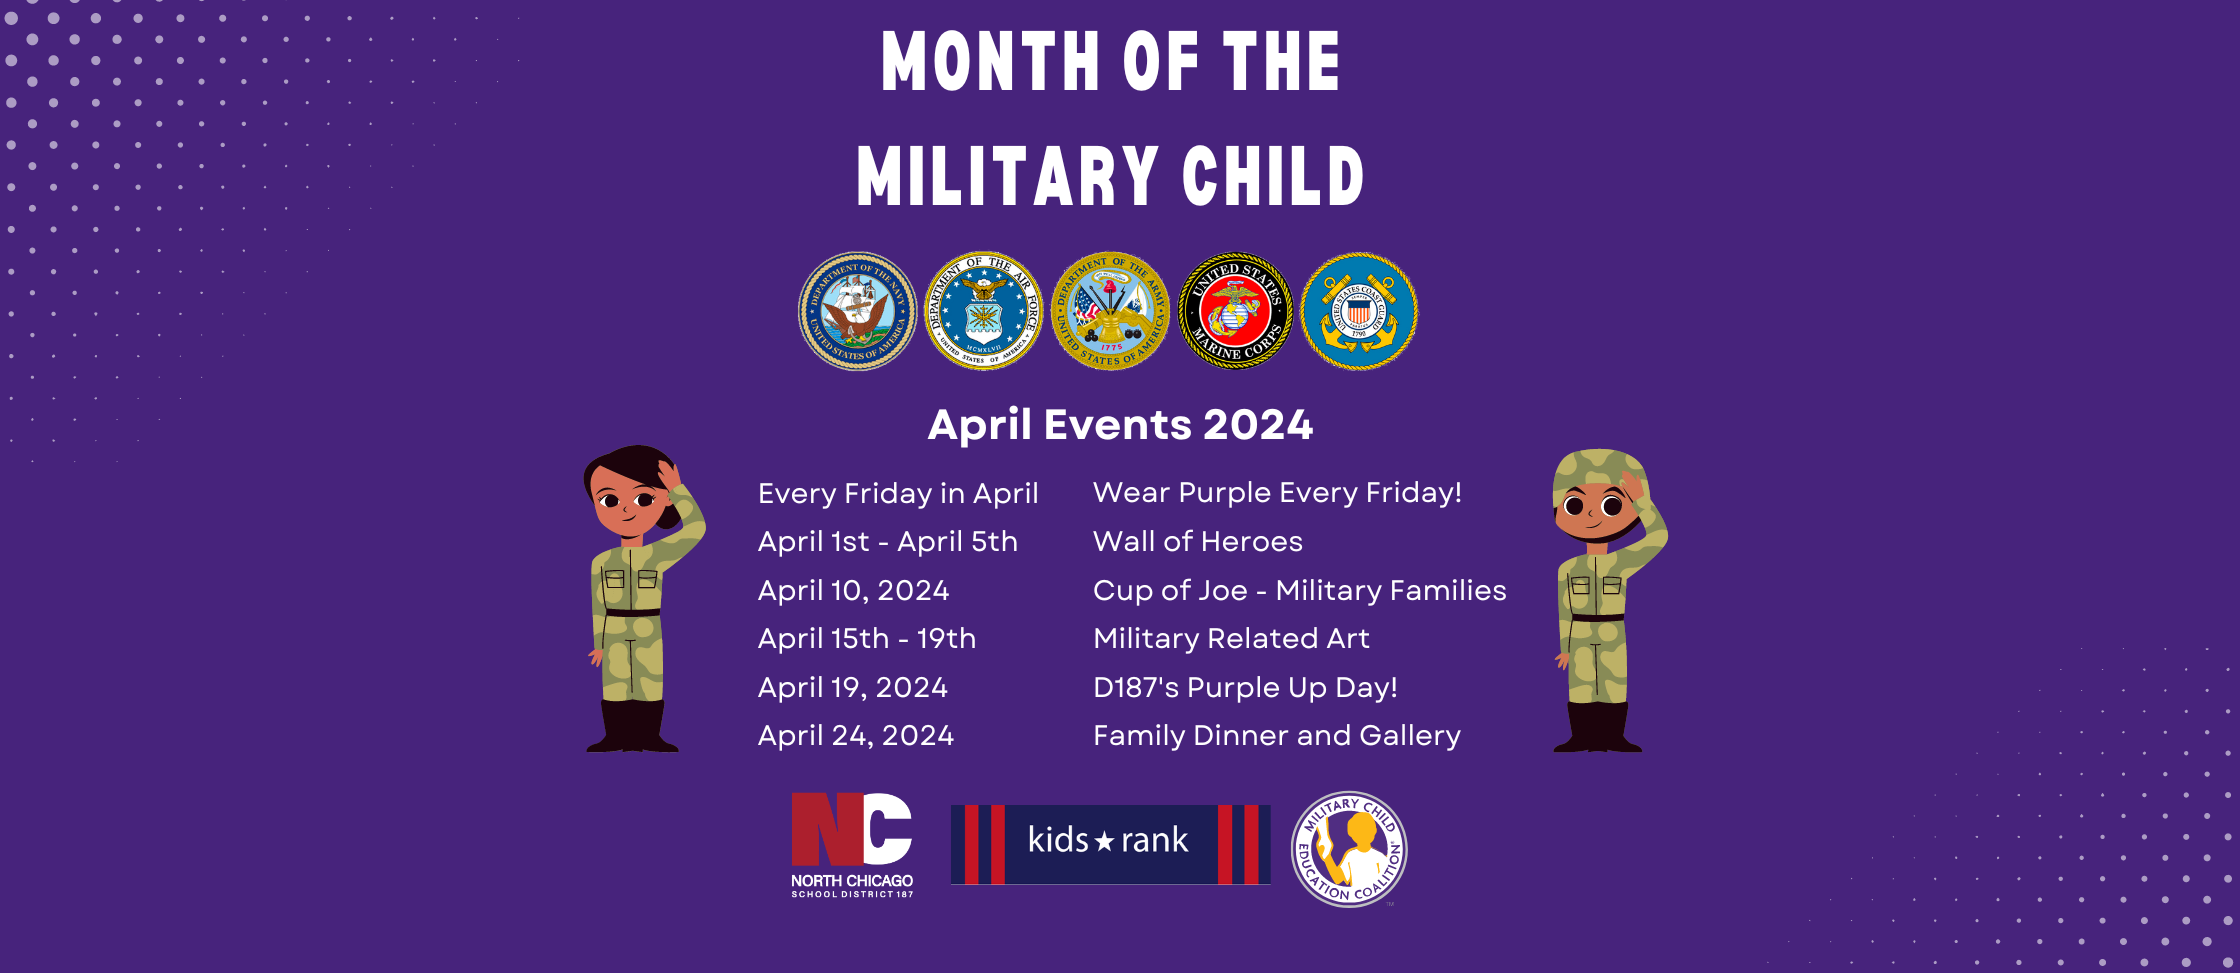 Moth of the Military Child